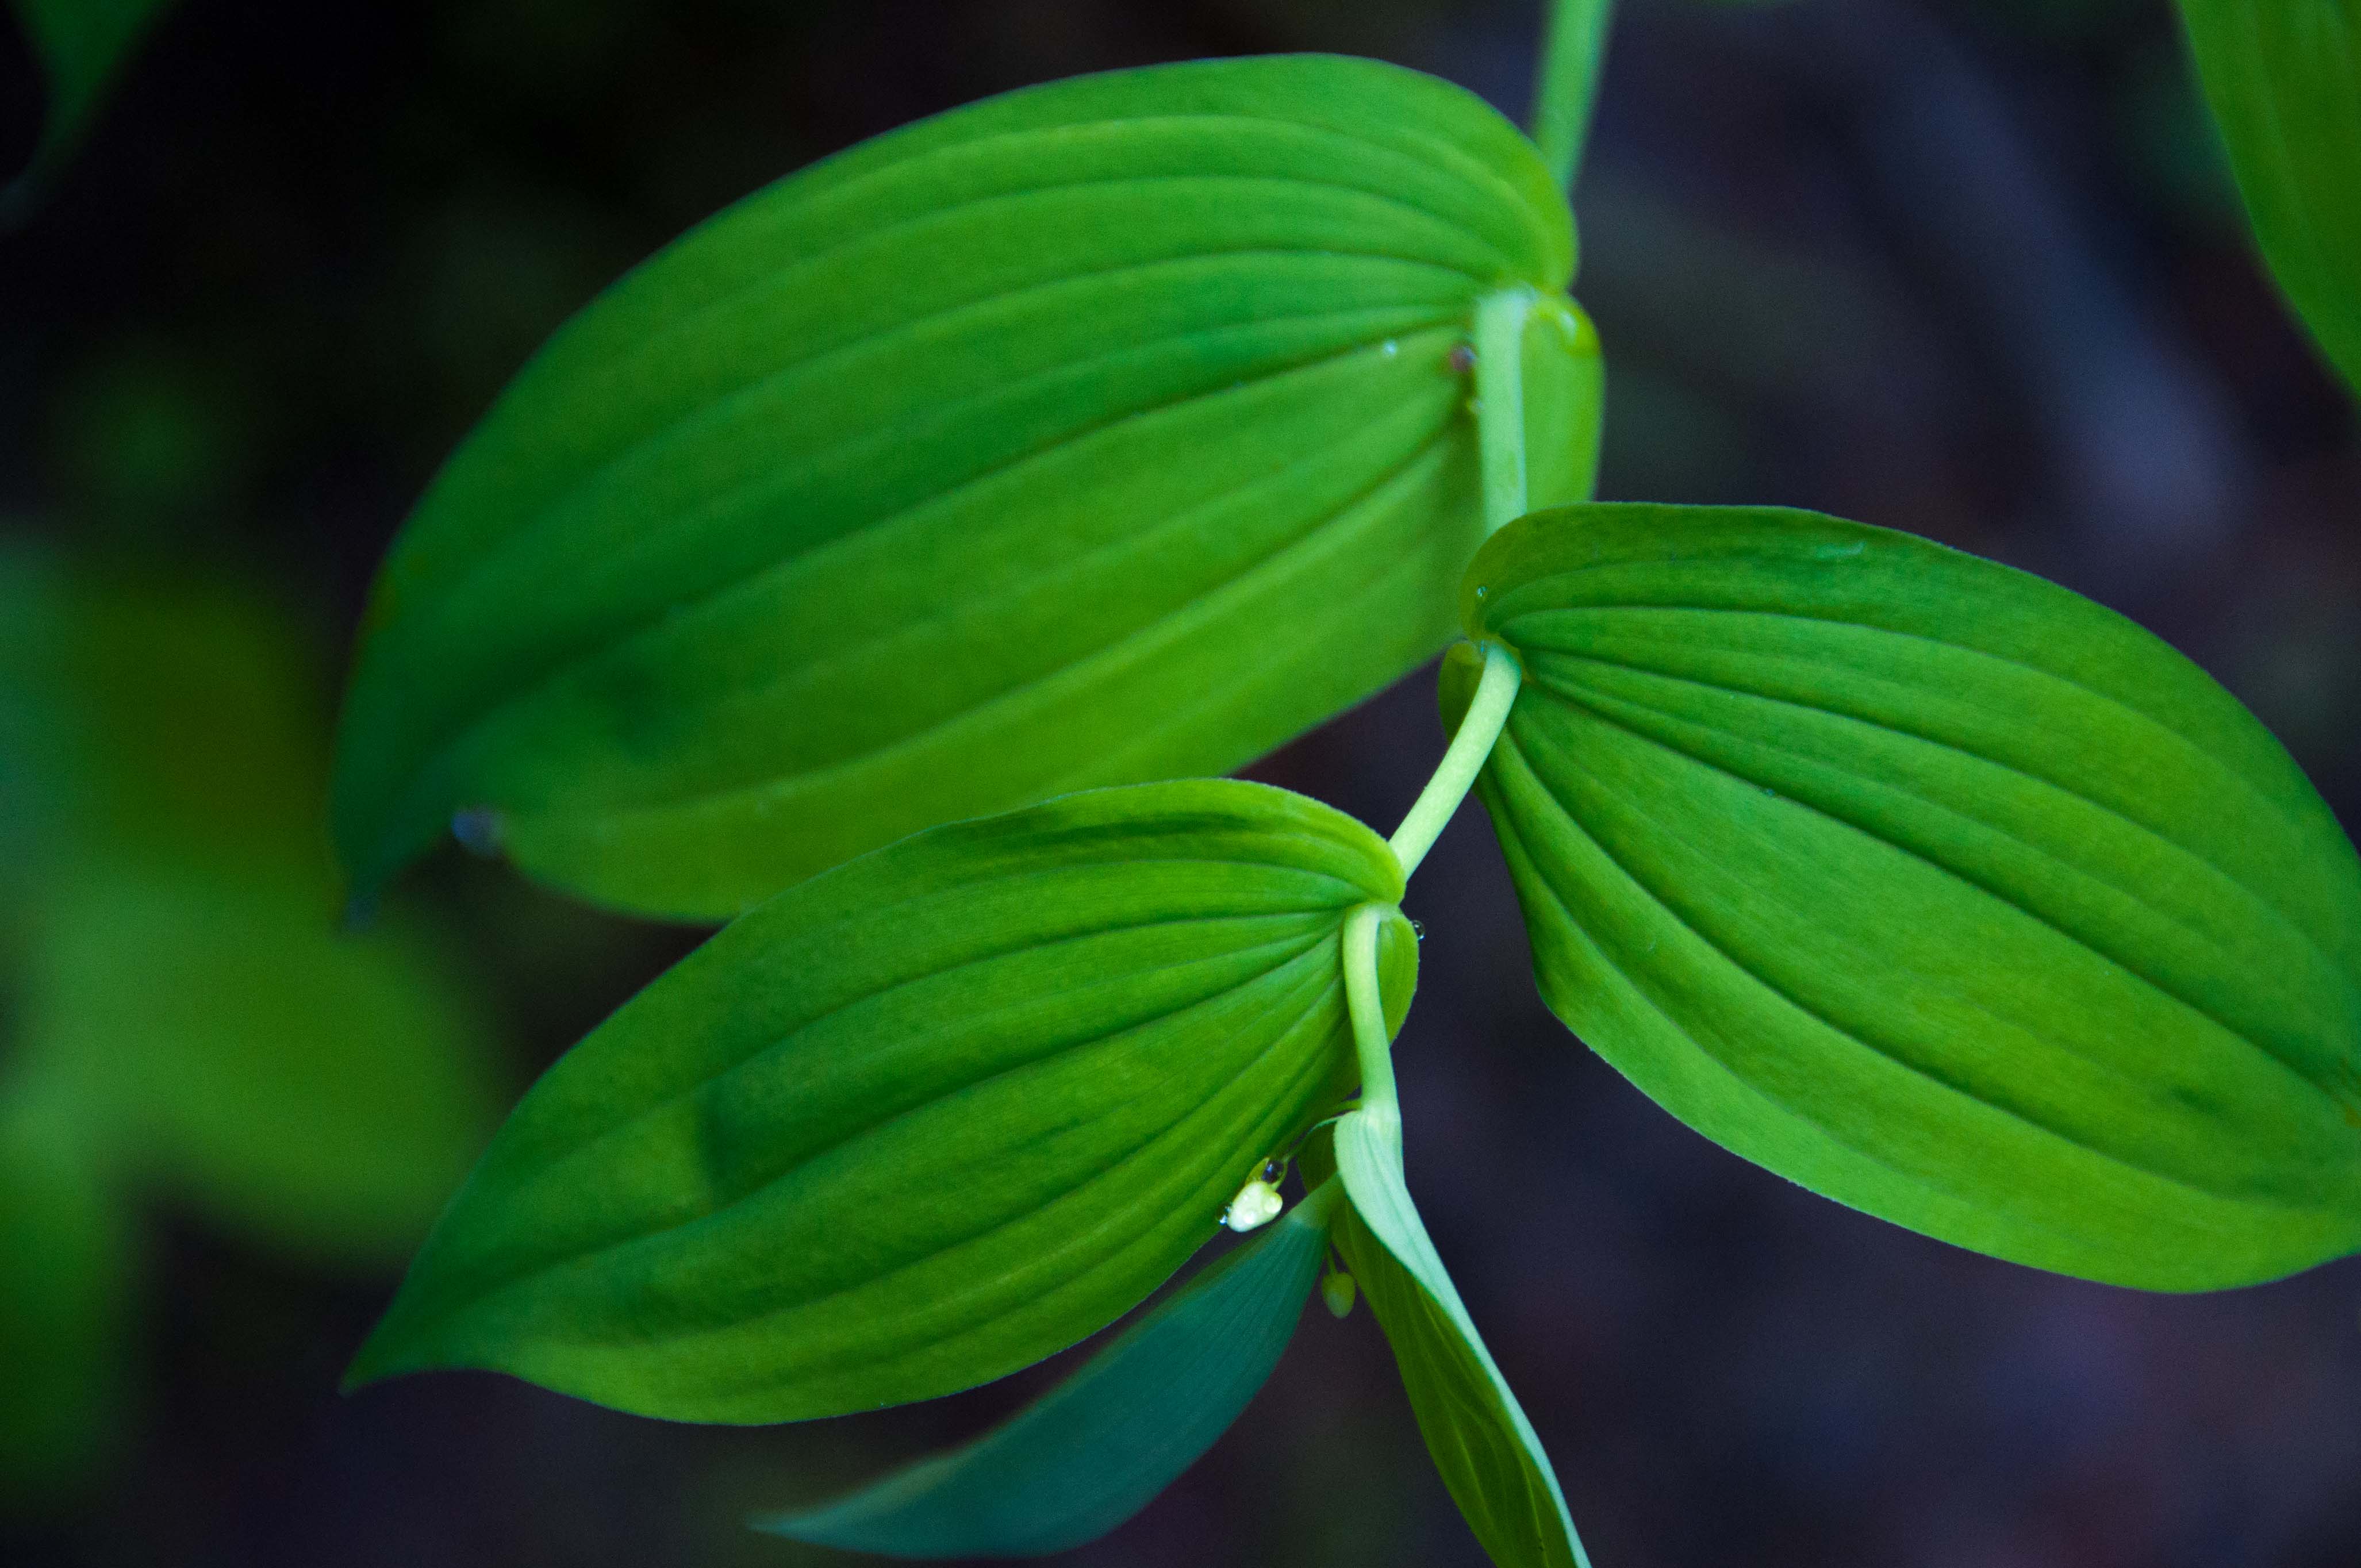 A close up of green leaves on a plant.